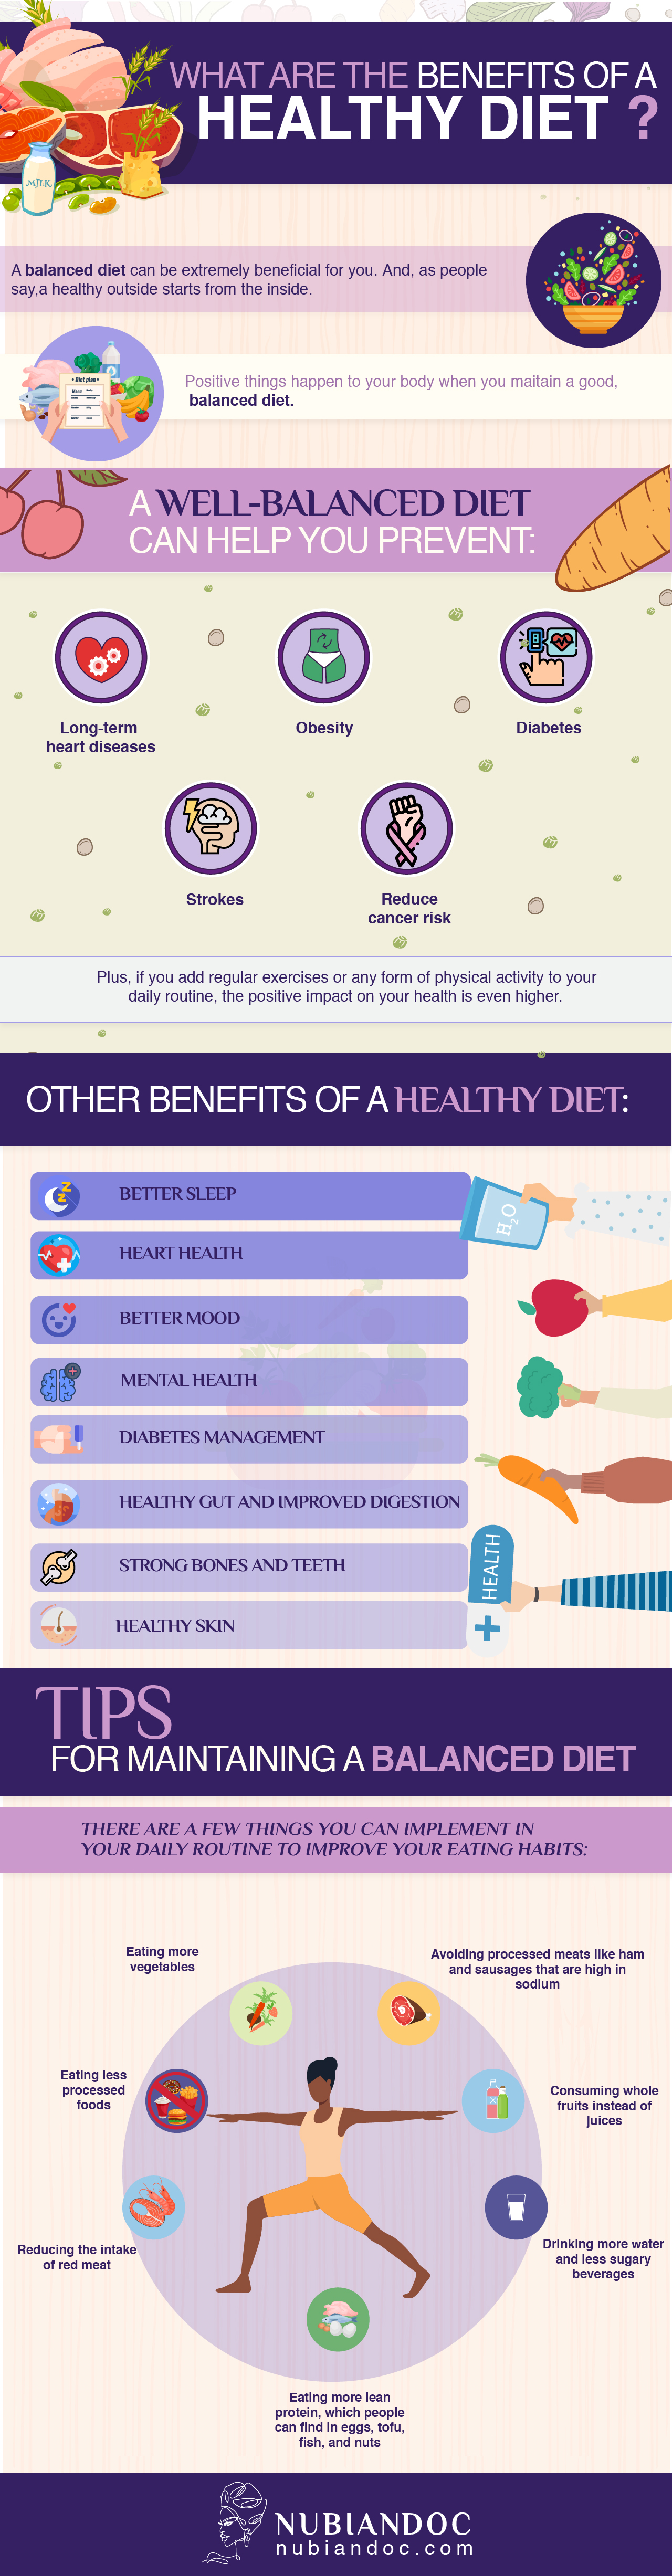 Benefits of a healthy diet